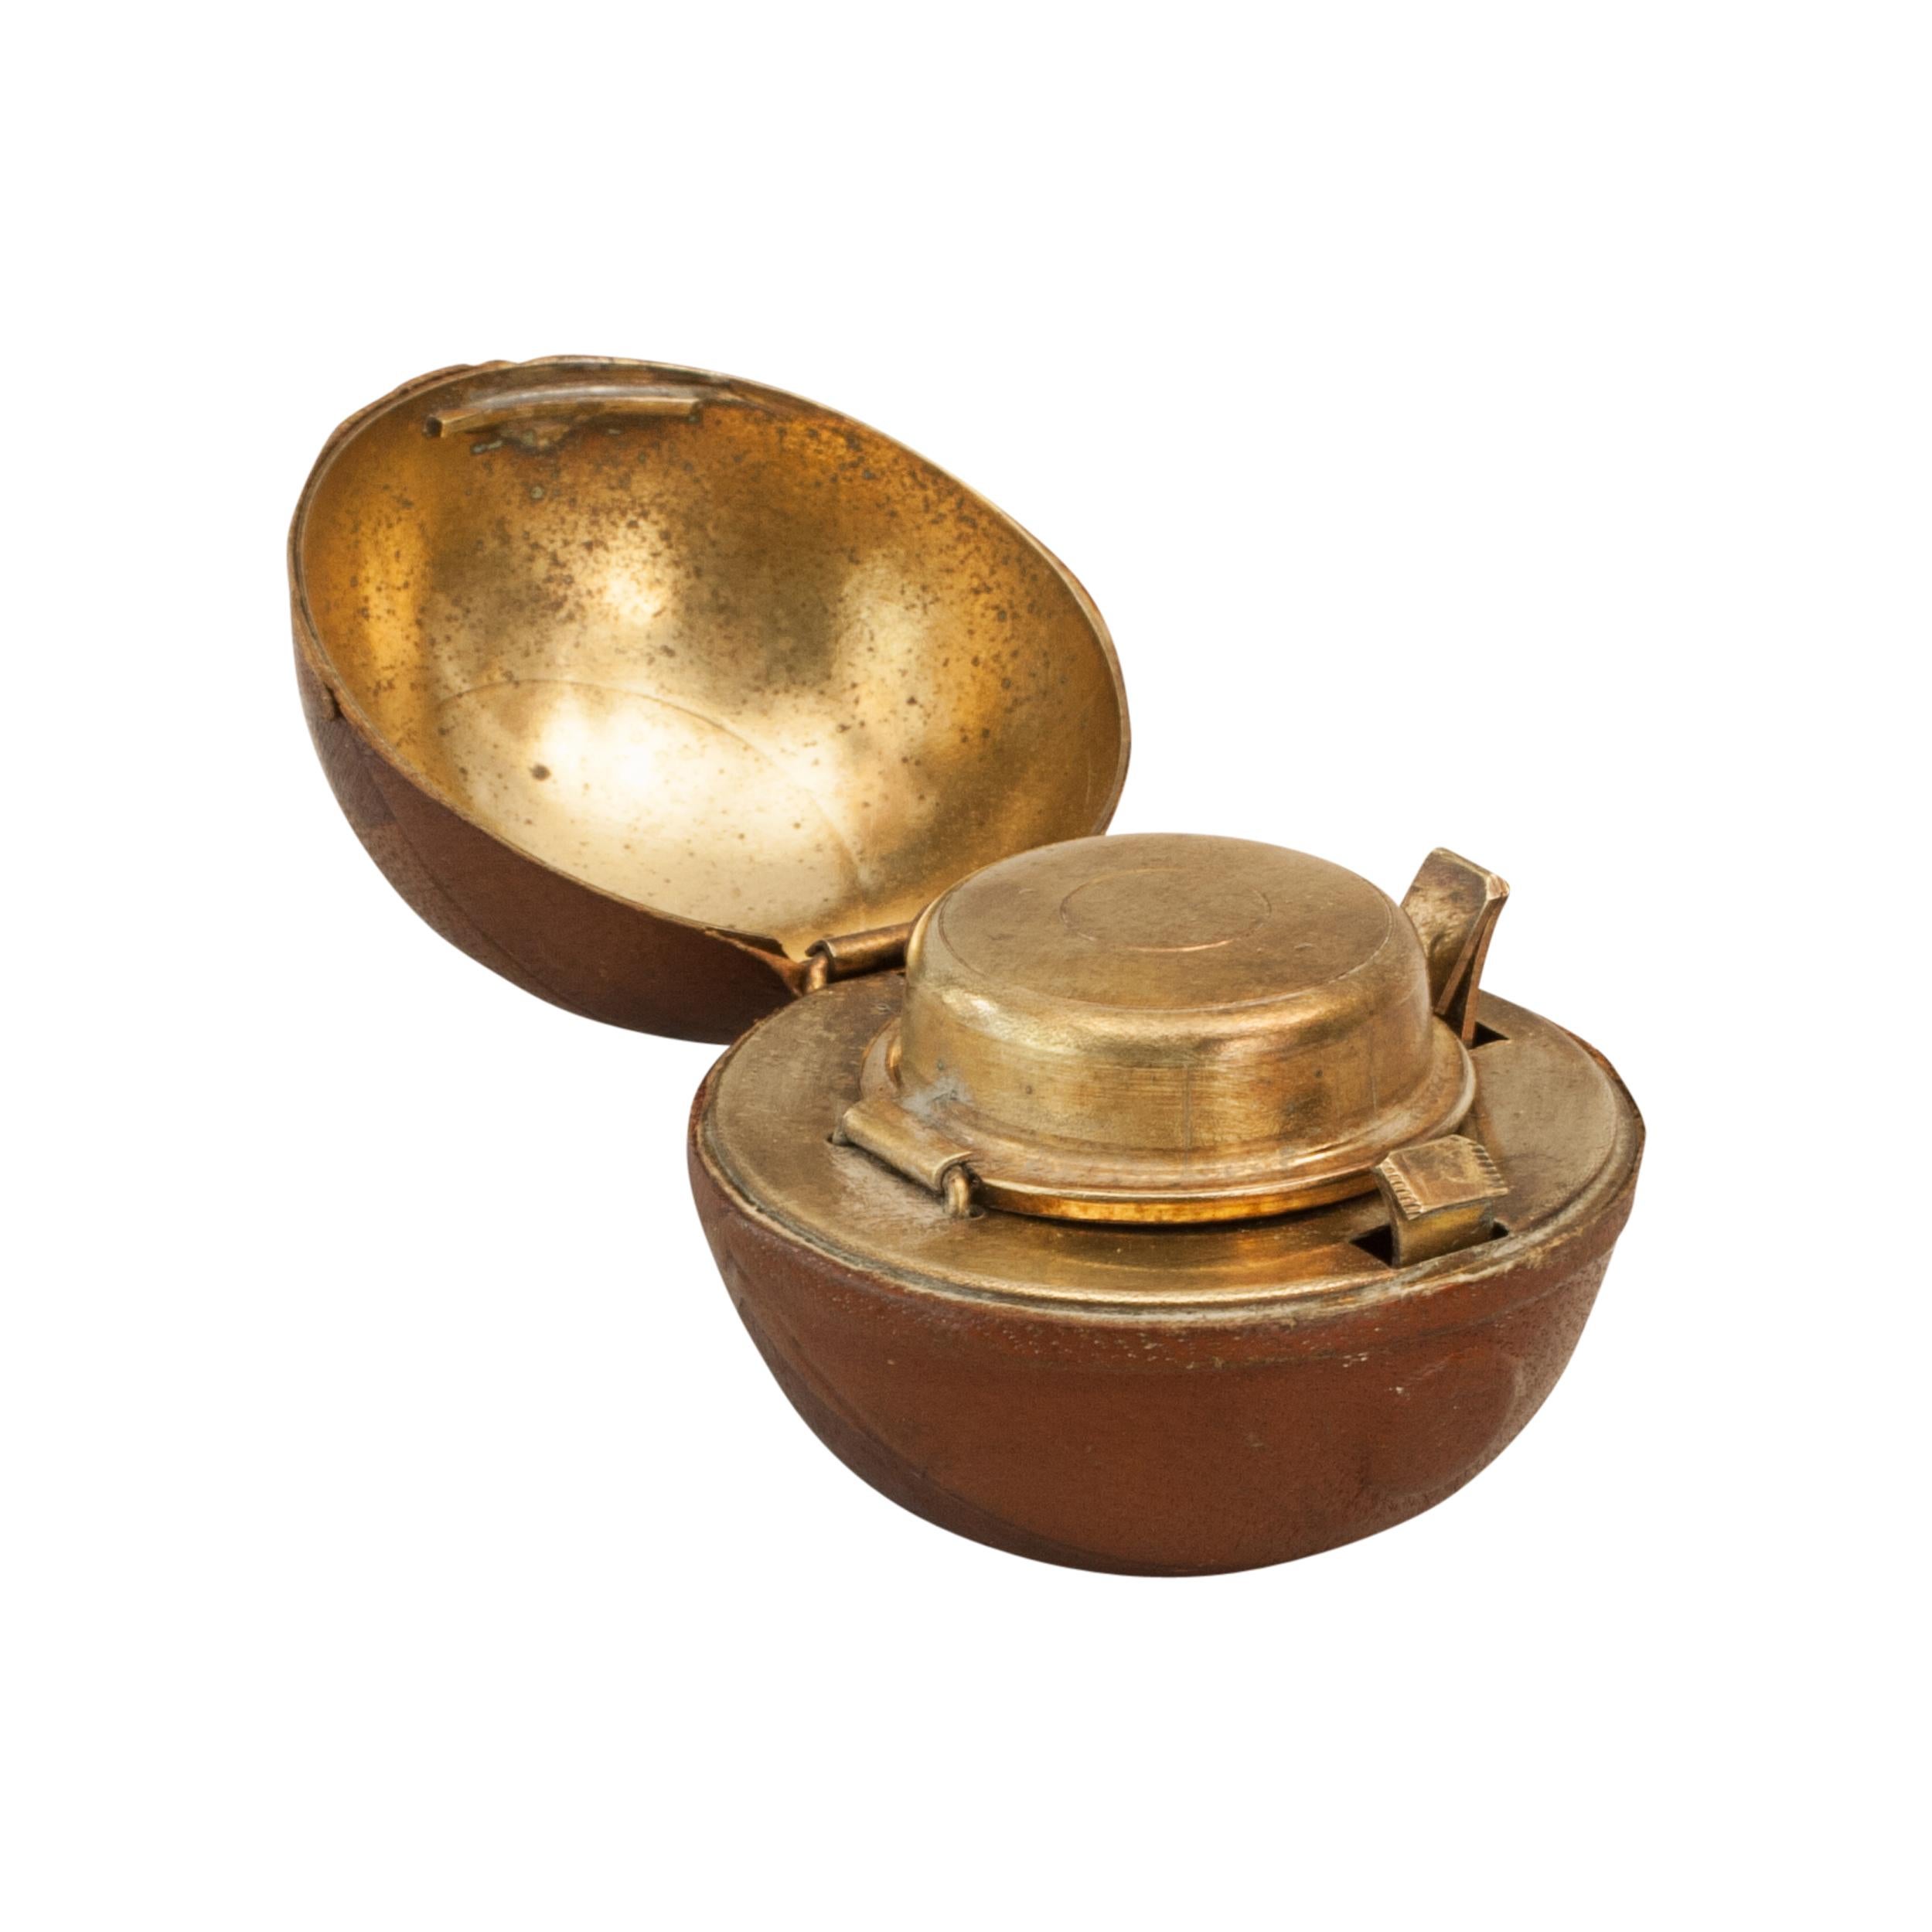 Rare Novelty Football Inkwell.
A wonderful leather covered traveling inkwell in the shape of a football ball. This is a very desirable, rare and unusual object made from brass and covered in imprinted leather to imitate a ball. It is hinged in the